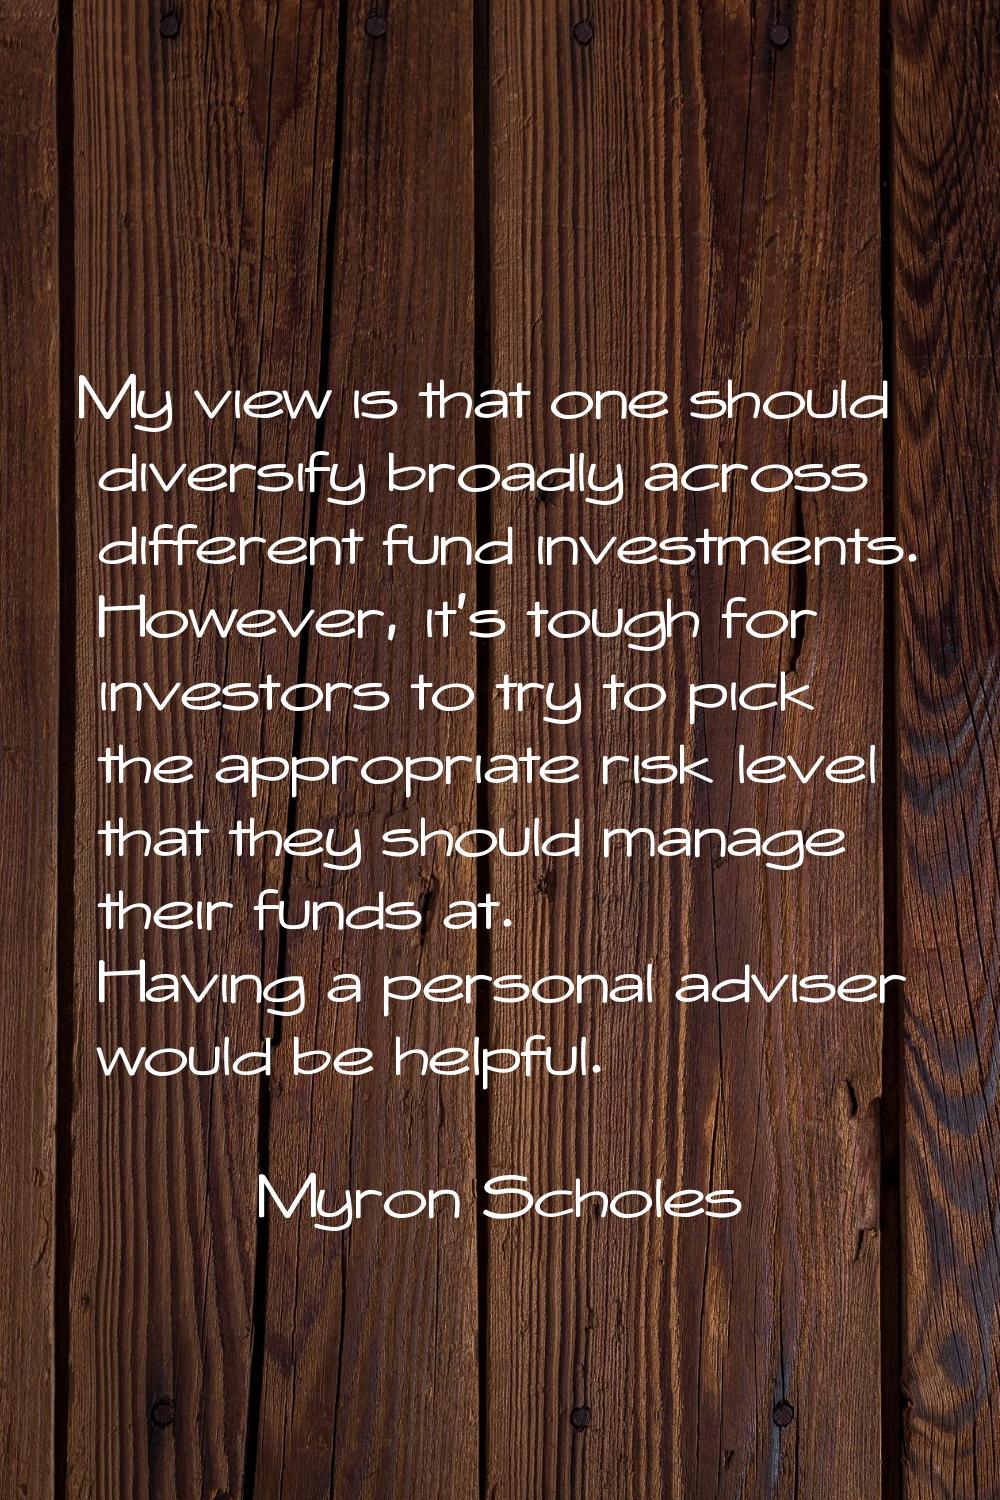 My view is that one should diversify broadly across different fund investments. However, it's tough